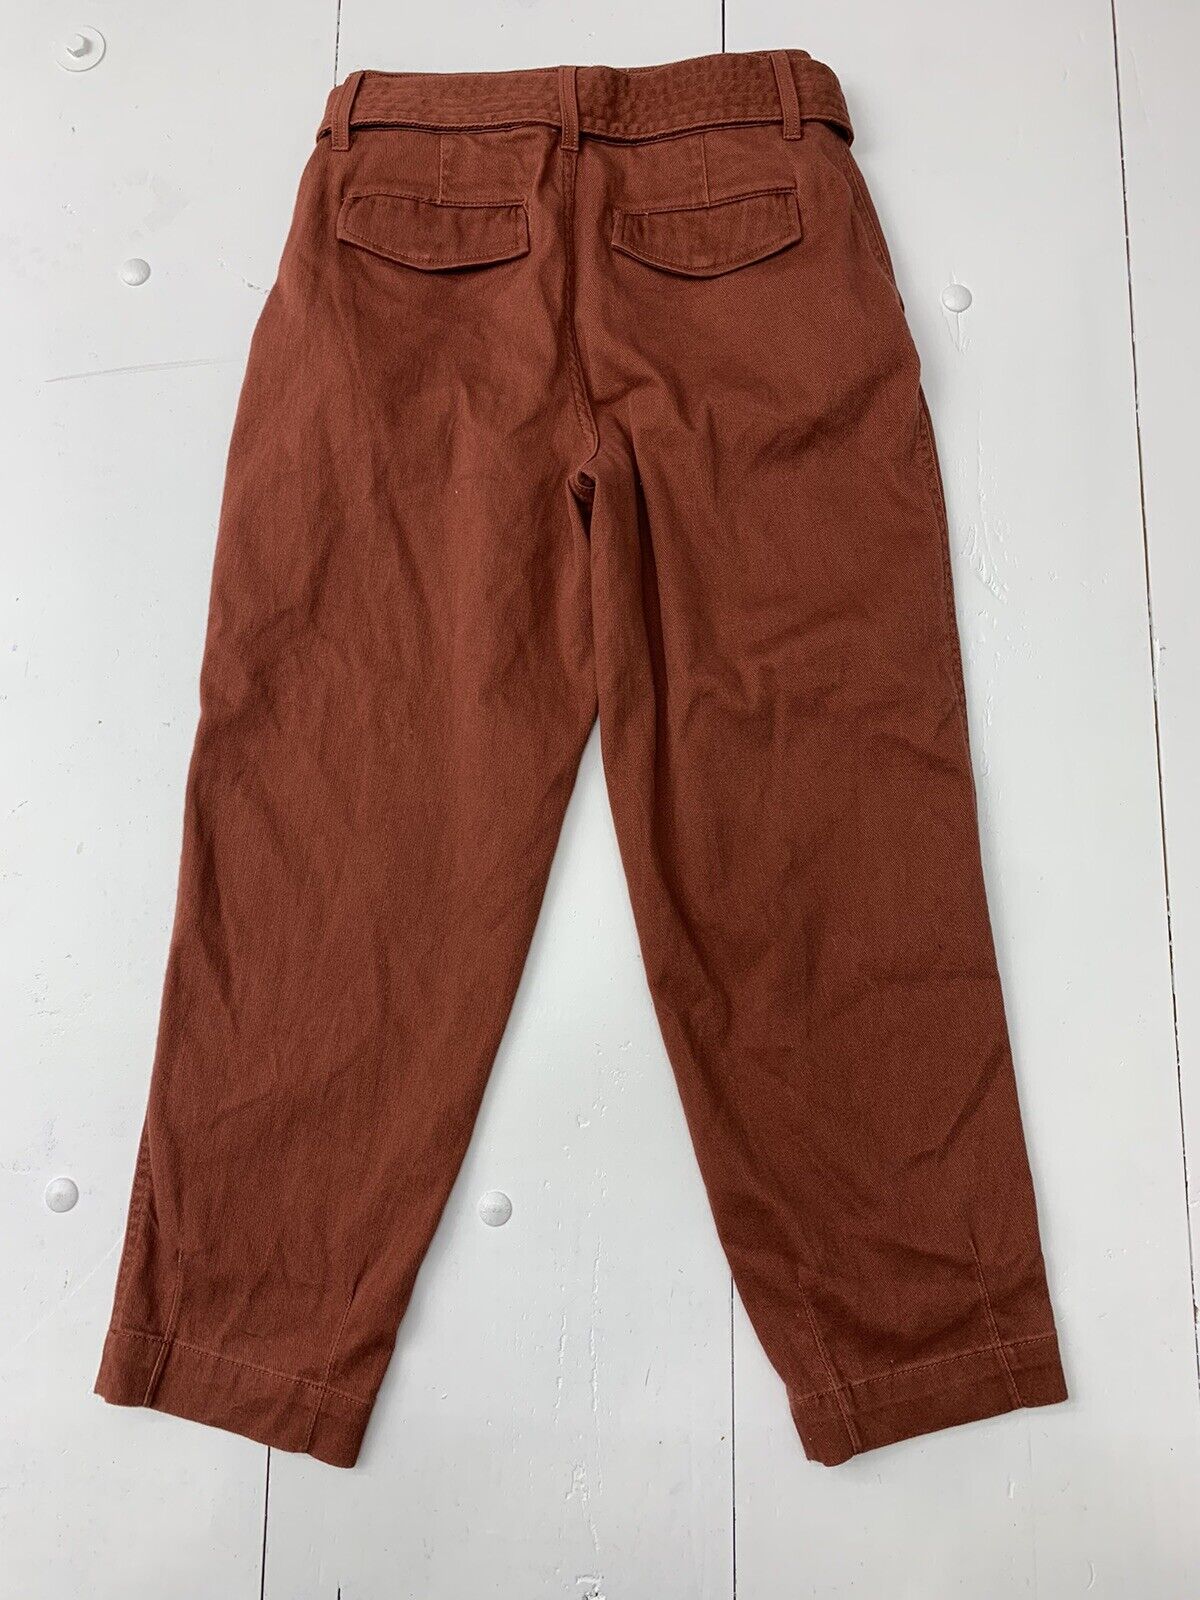 A New Day Pants Women's Size 4 Rust Brown/Orange Stretch